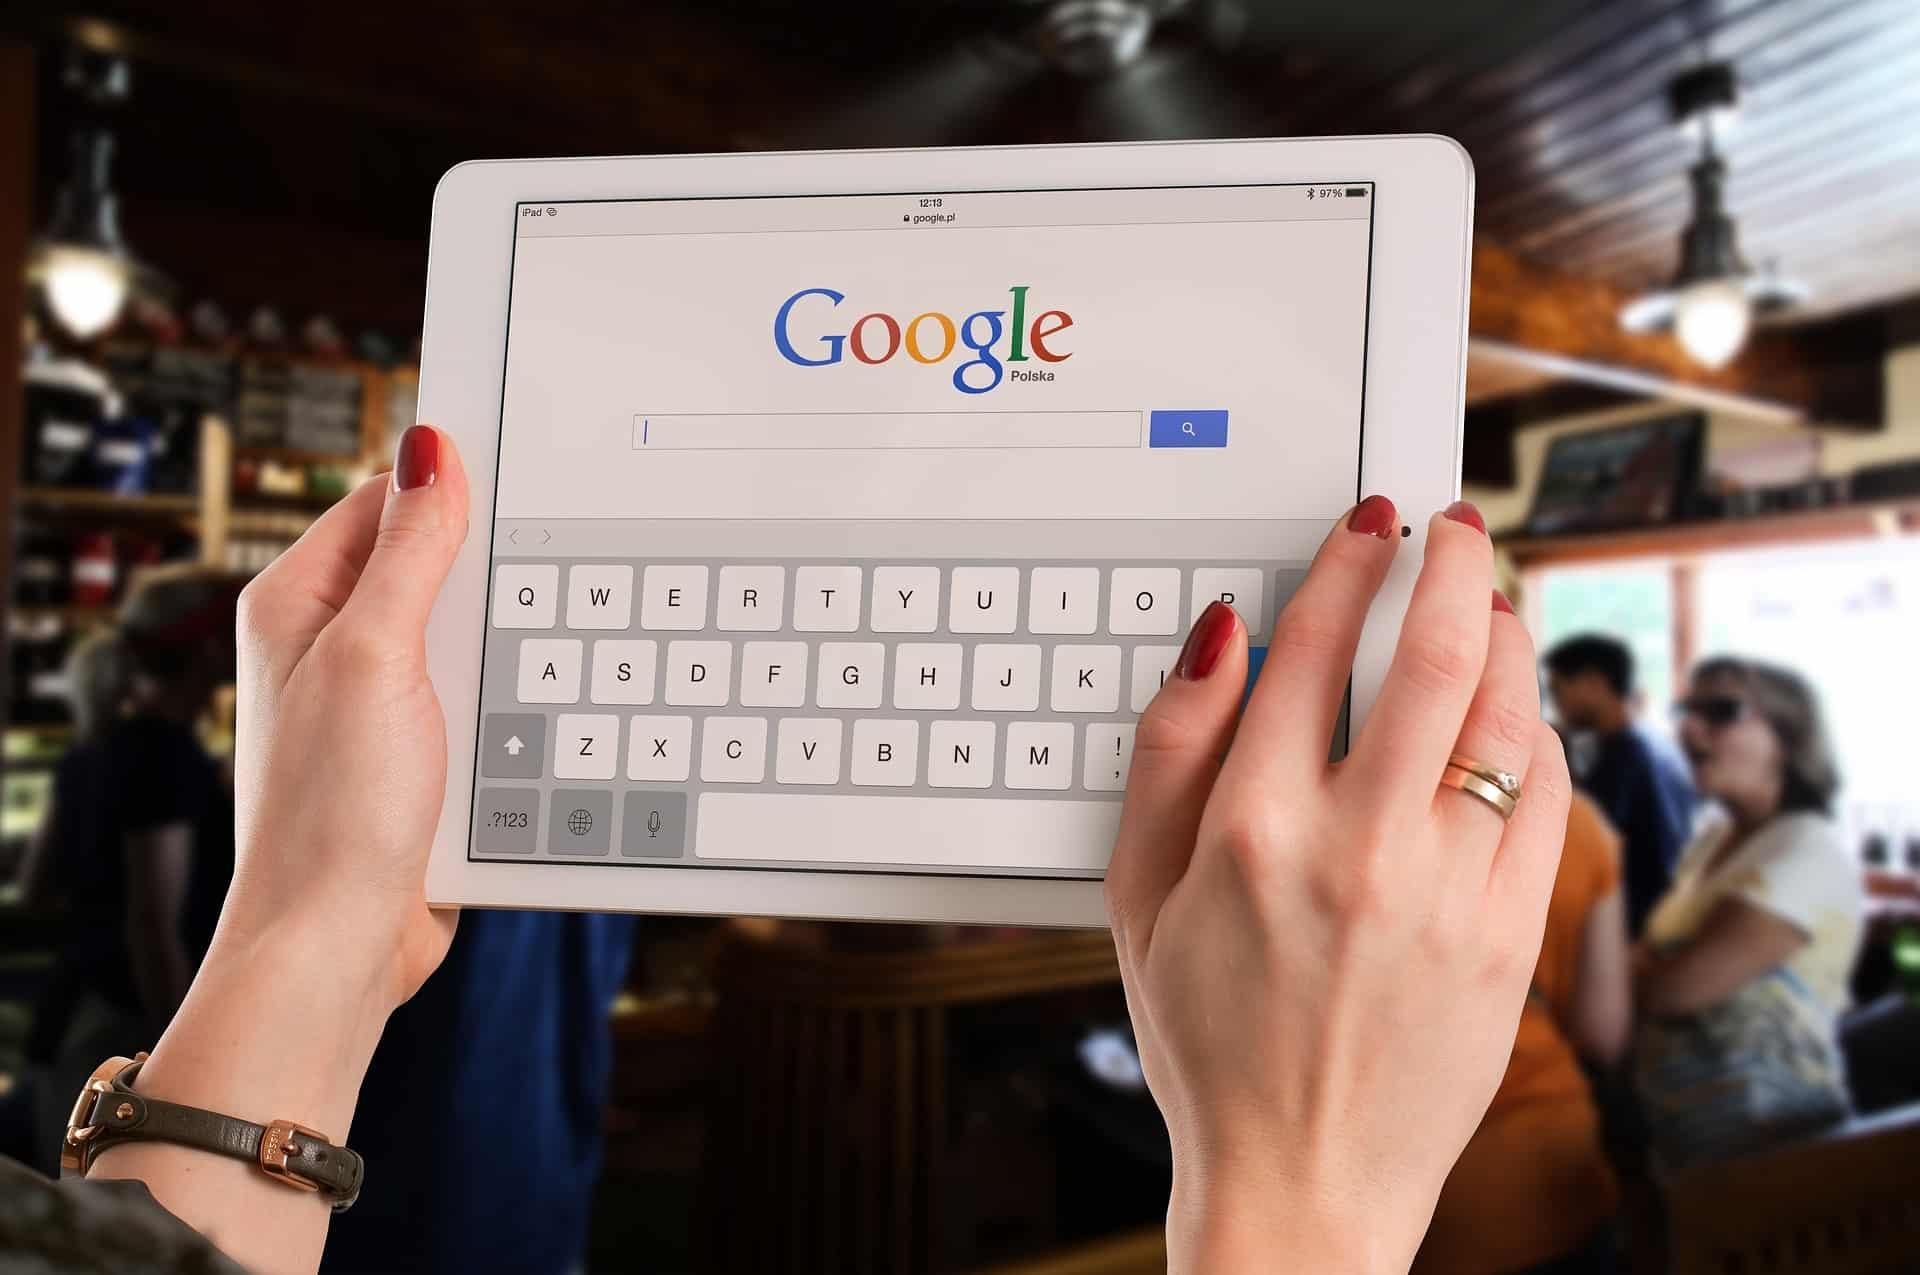 A woman holds up an iPad with Google search box on the home screen. The image is symbolic of SEO and SEA as online marketing measures.